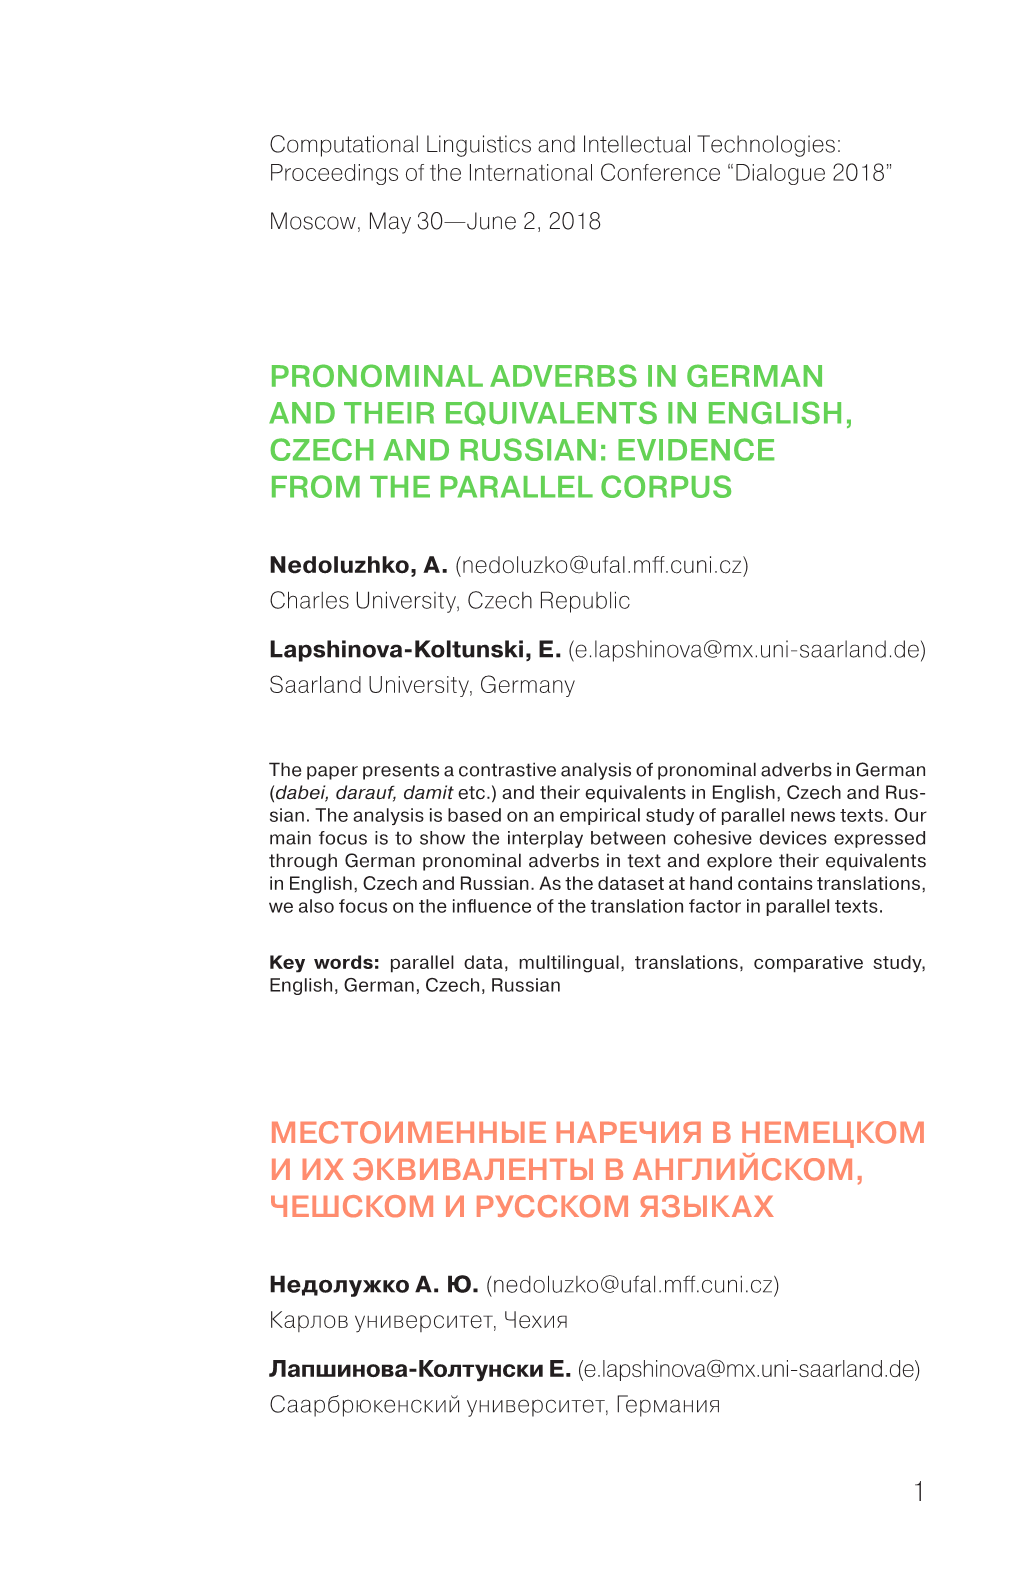 Pronominal Adverbs in German and Their Equivalents in English, Czech and Russian: Evidence from the Parallel Corpus